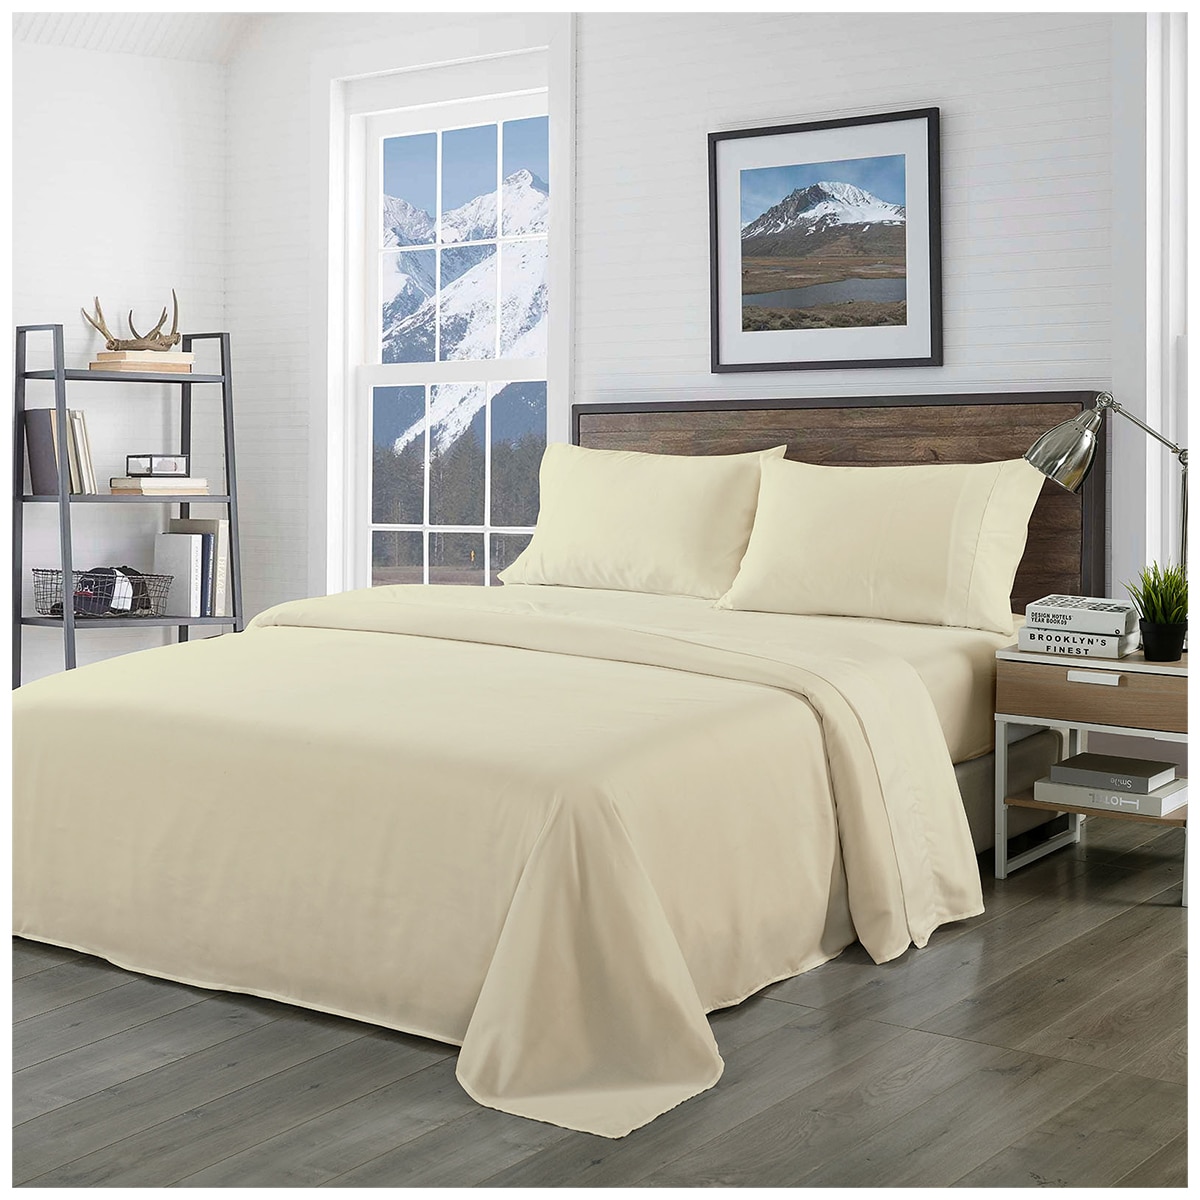 Bdirect Royal Comfort Blended Bamboo Sheet Set Double - Ivory